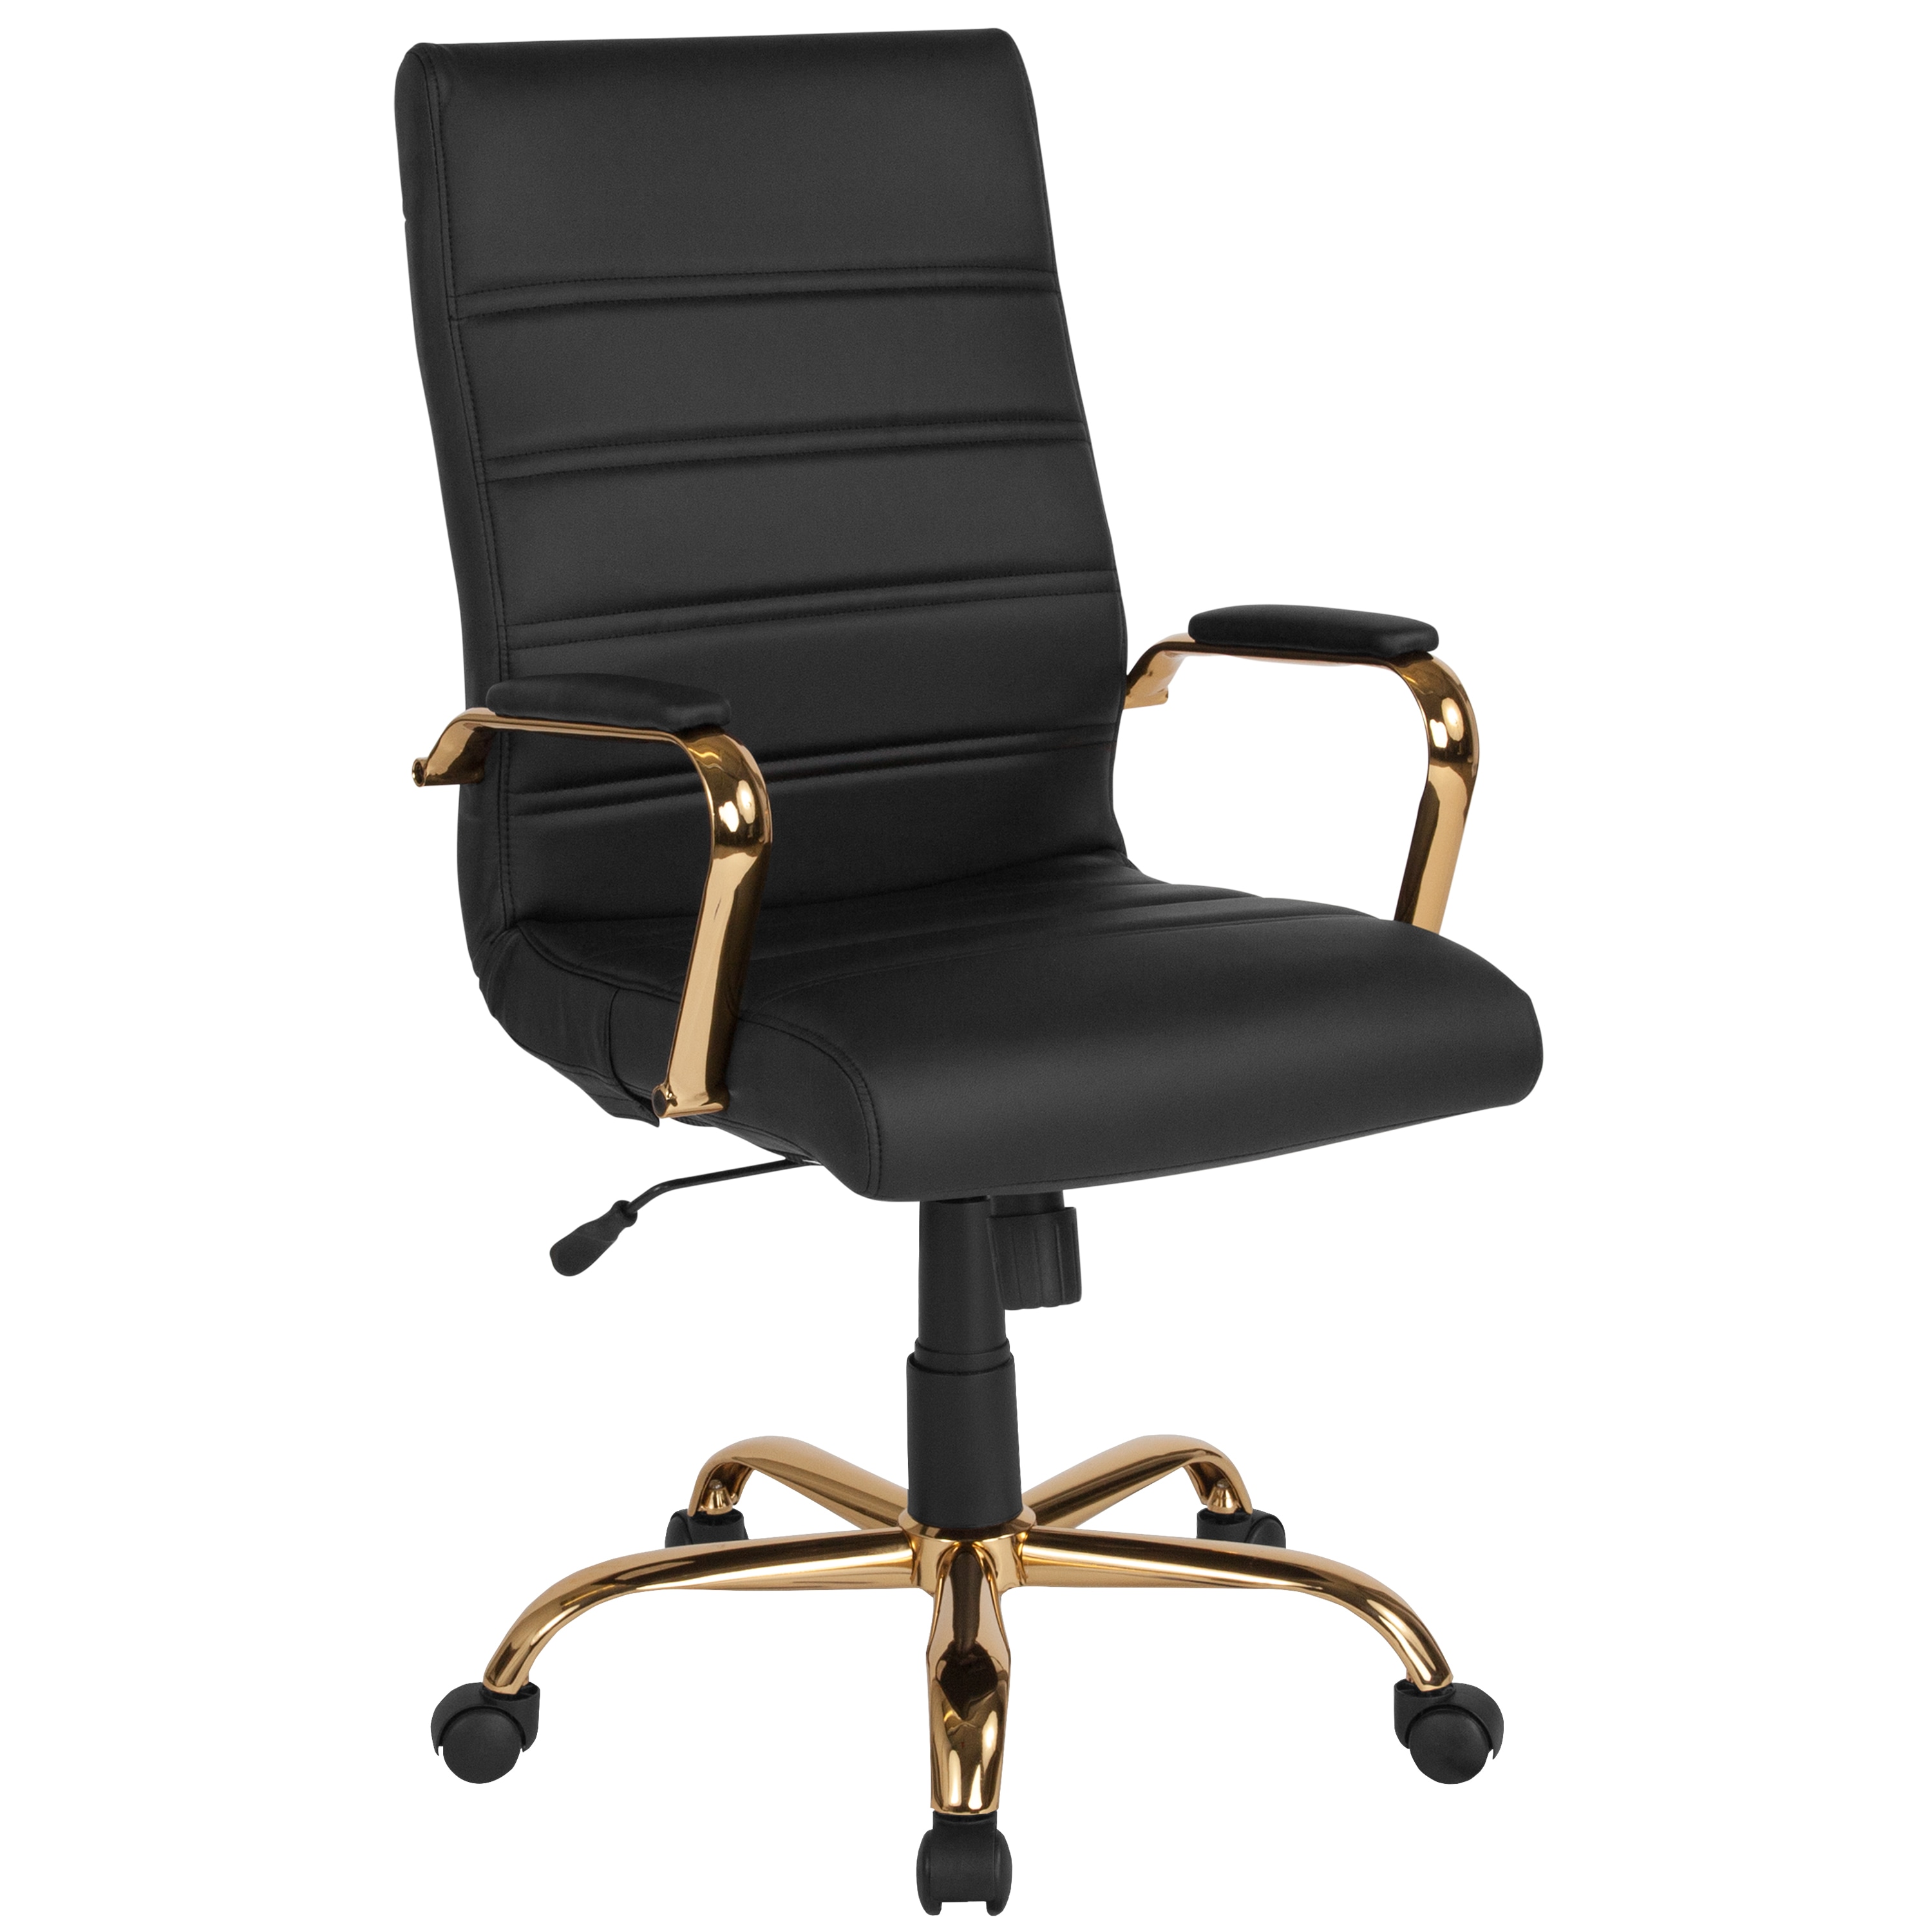 Swivel Faux Leather Executive Chair, Black Leather Executive Desk Chair